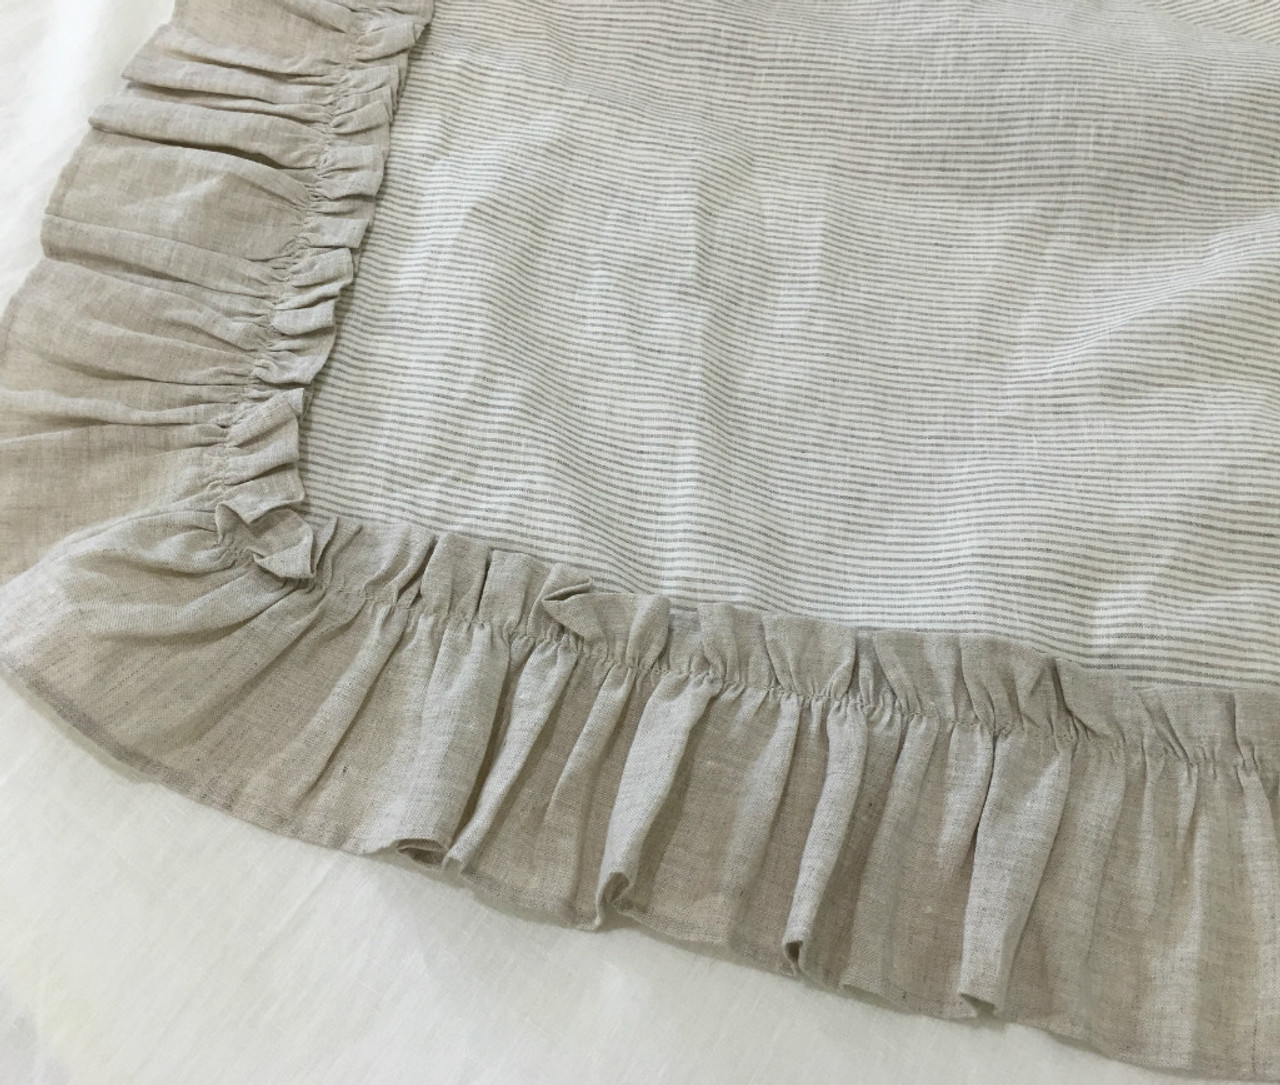 Linen Ticking Striped Euro Sham with Natural Linen Ruffles in Vintage ...